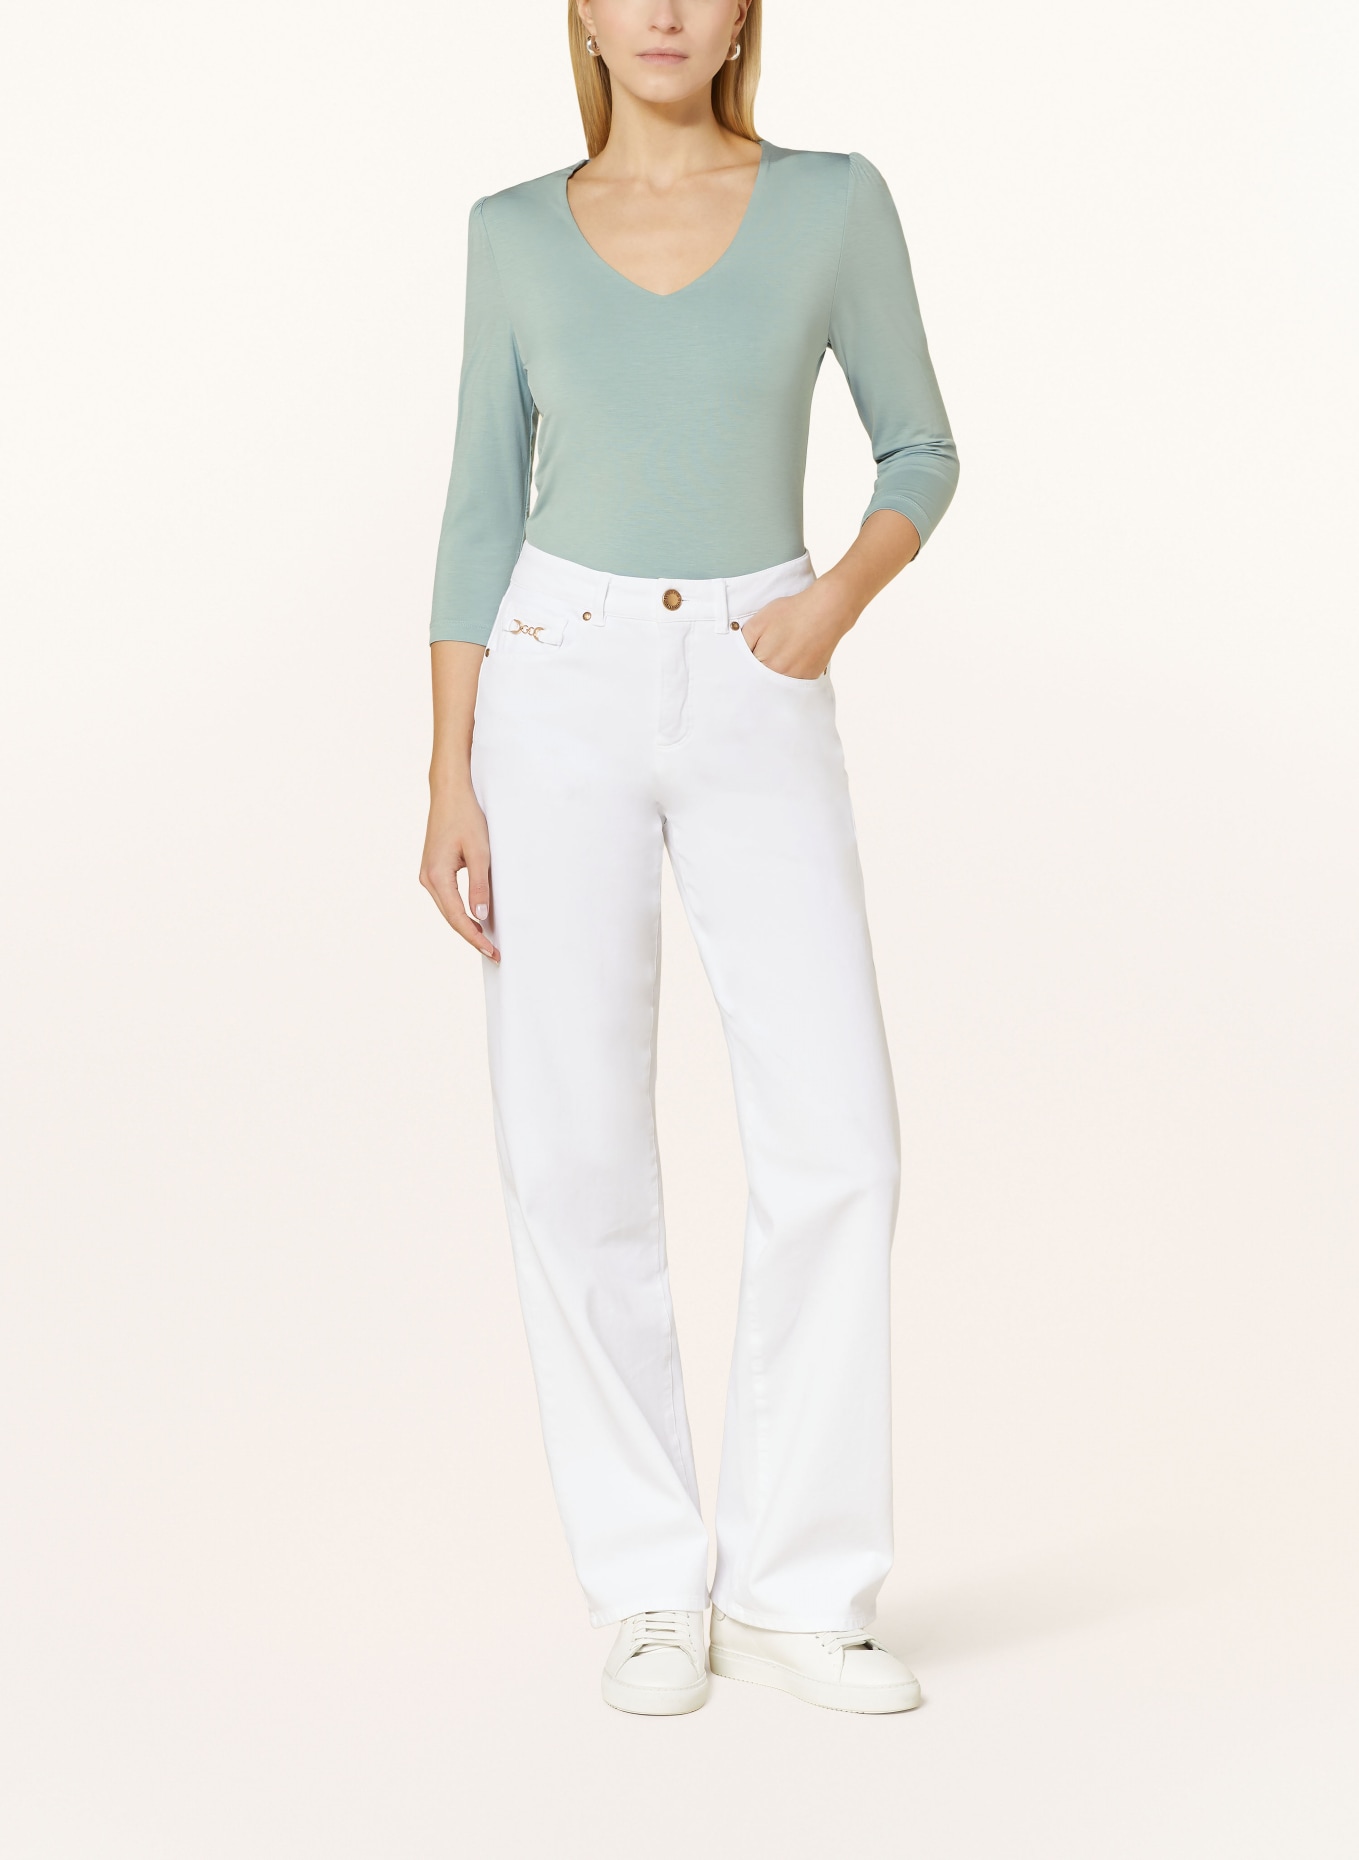 BEAUMONT Shirt with 3/4 sleeves, Color: LIGHT BLUE (Image 2)